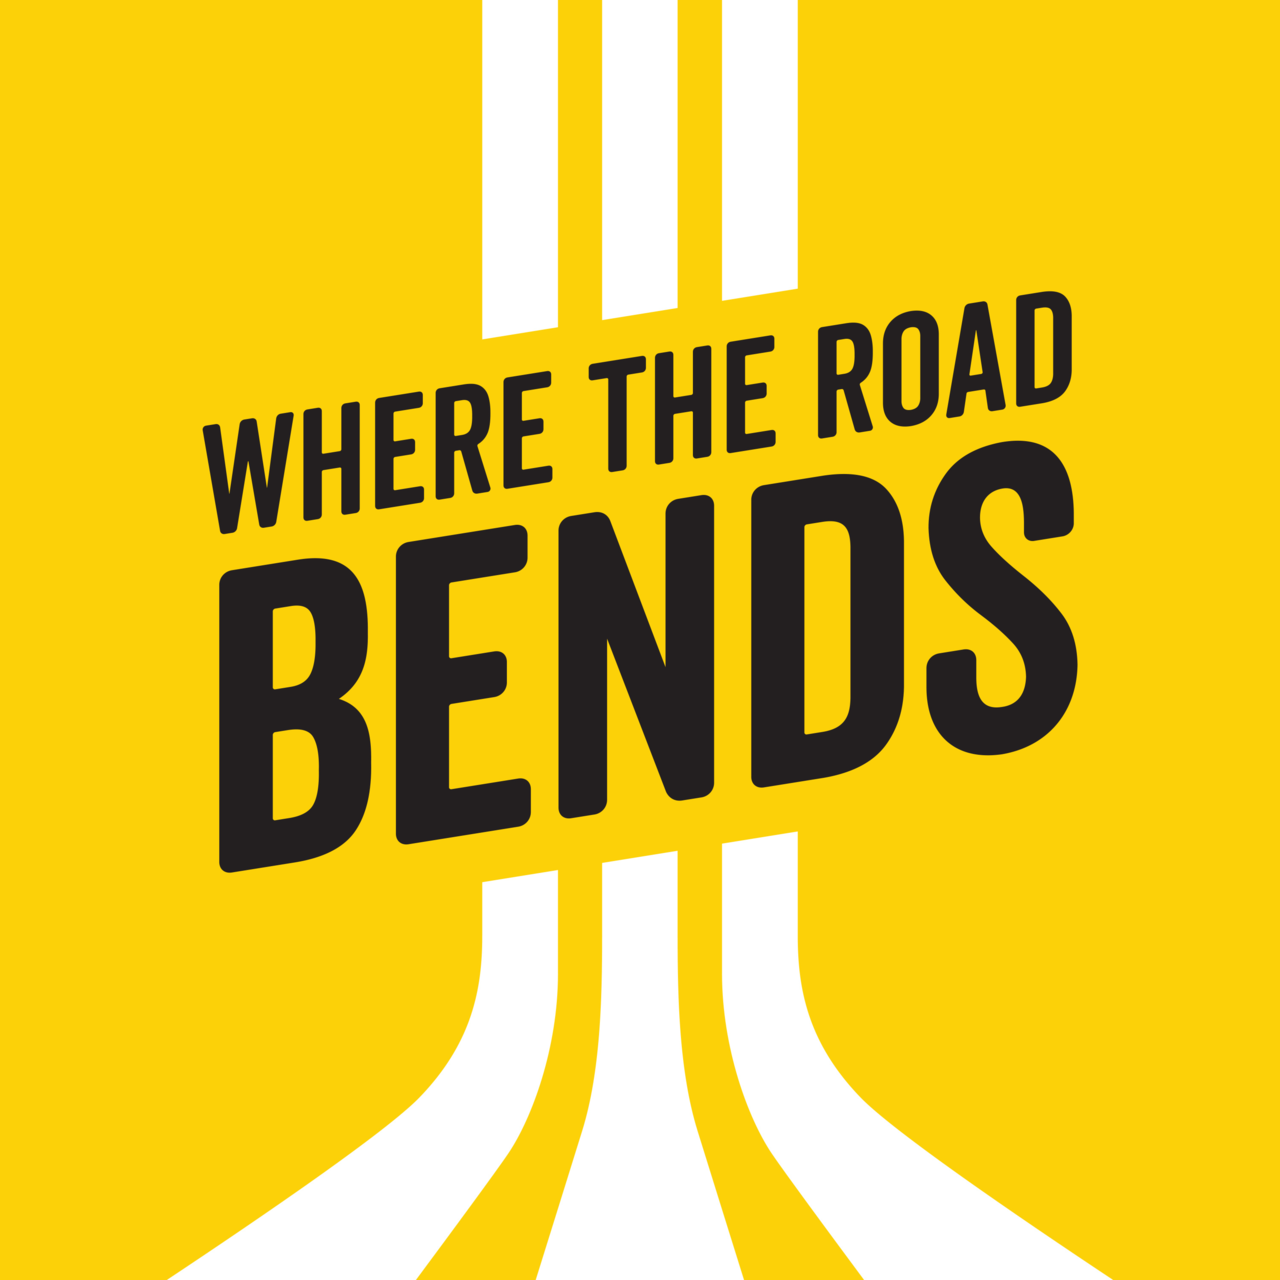 Artwork for Where the Road Bends